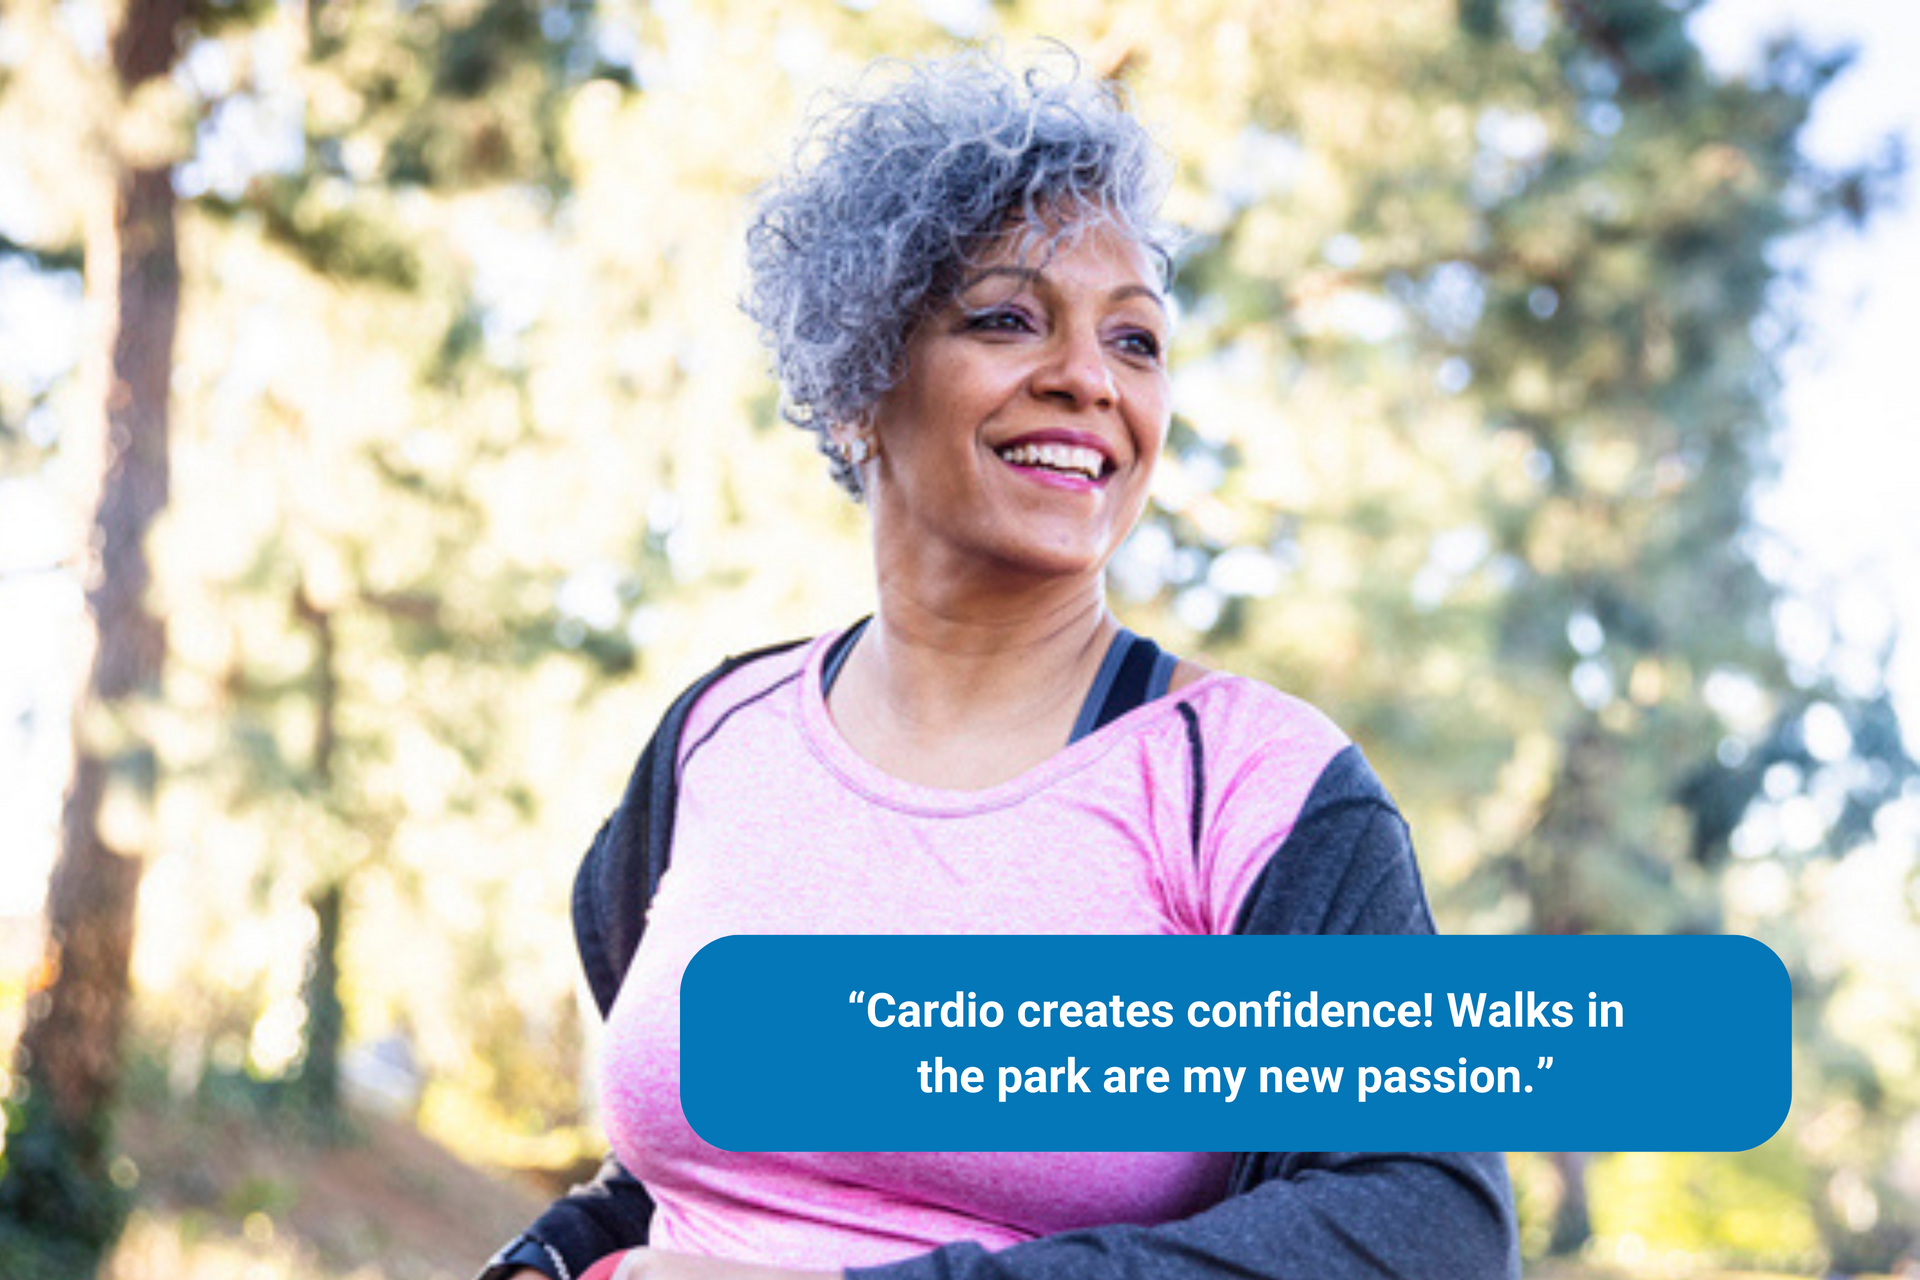 Woman says cardiovascular boost confidence and enjoys outdoor exercise 